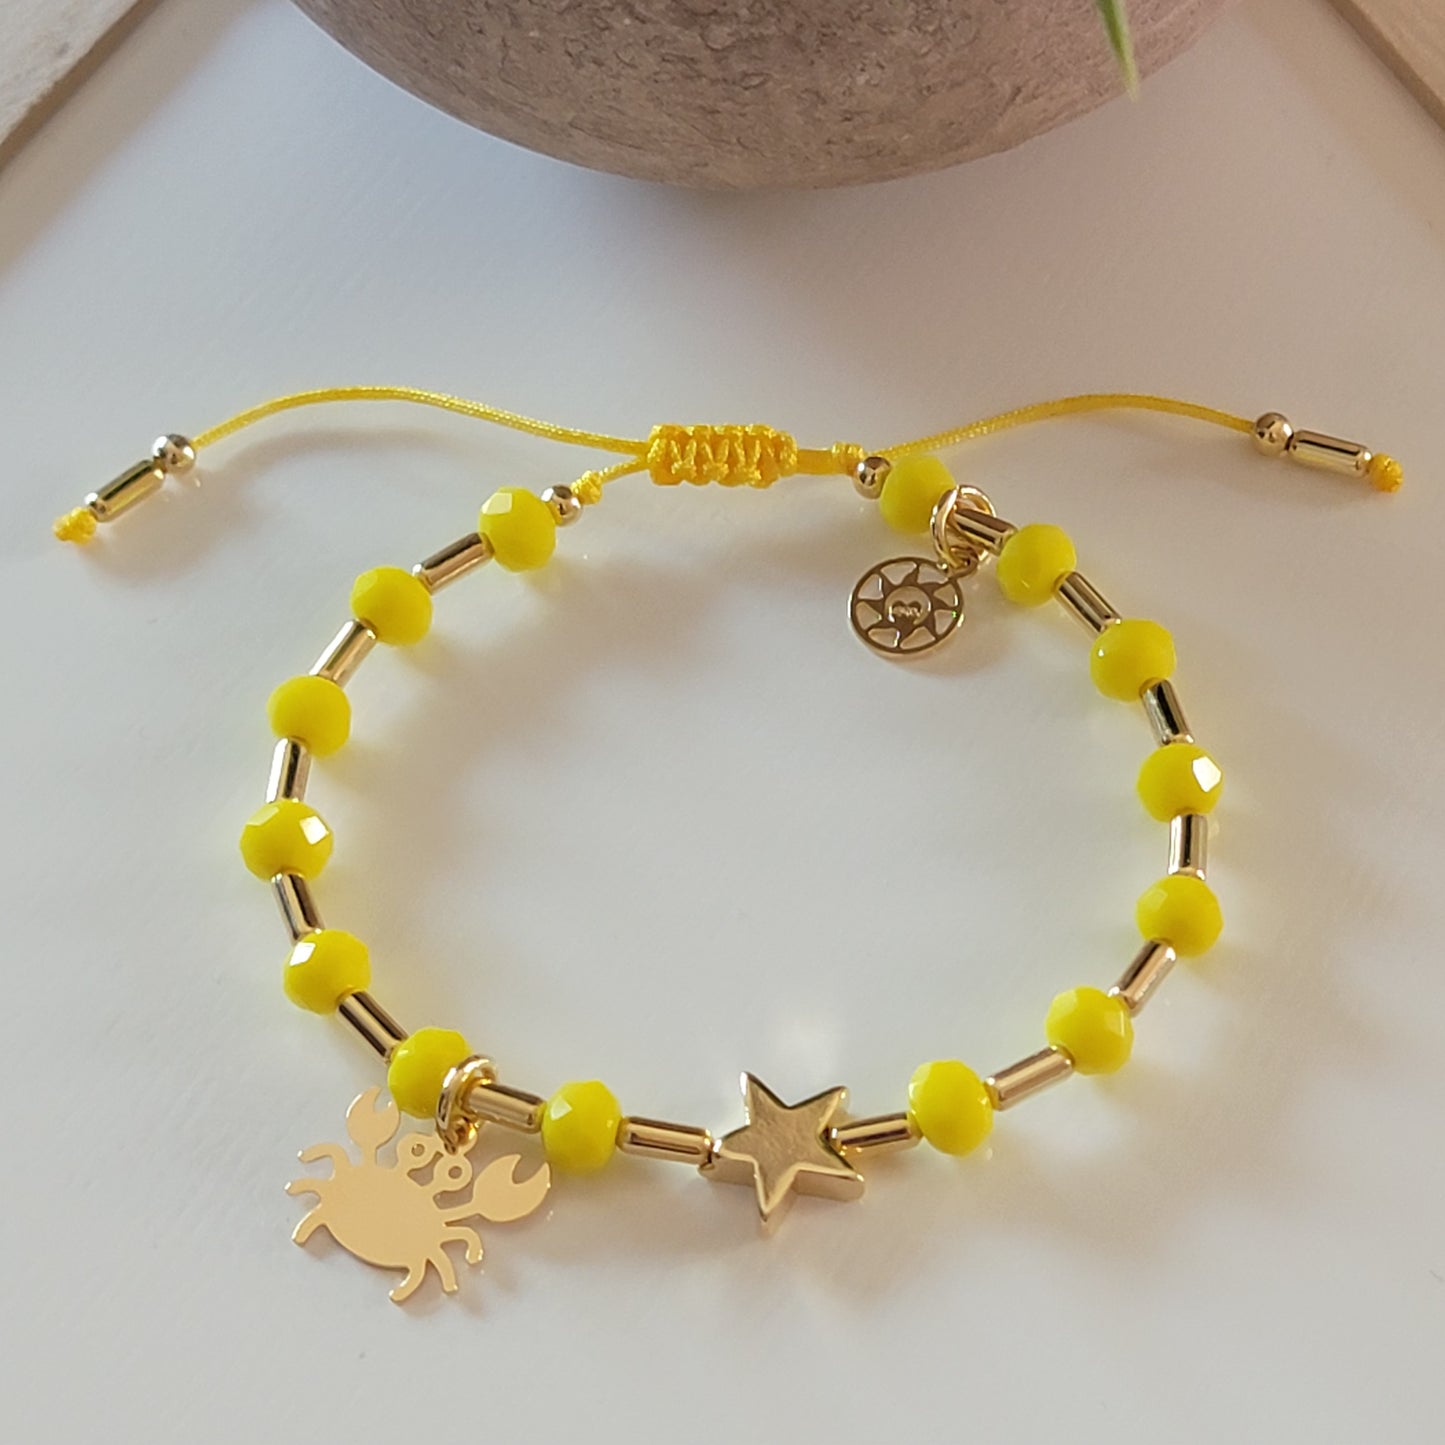 Crab and Star Bracelet, Yellow Crystals and 18K Gold-Filled Charms, Tube Beads, and Details